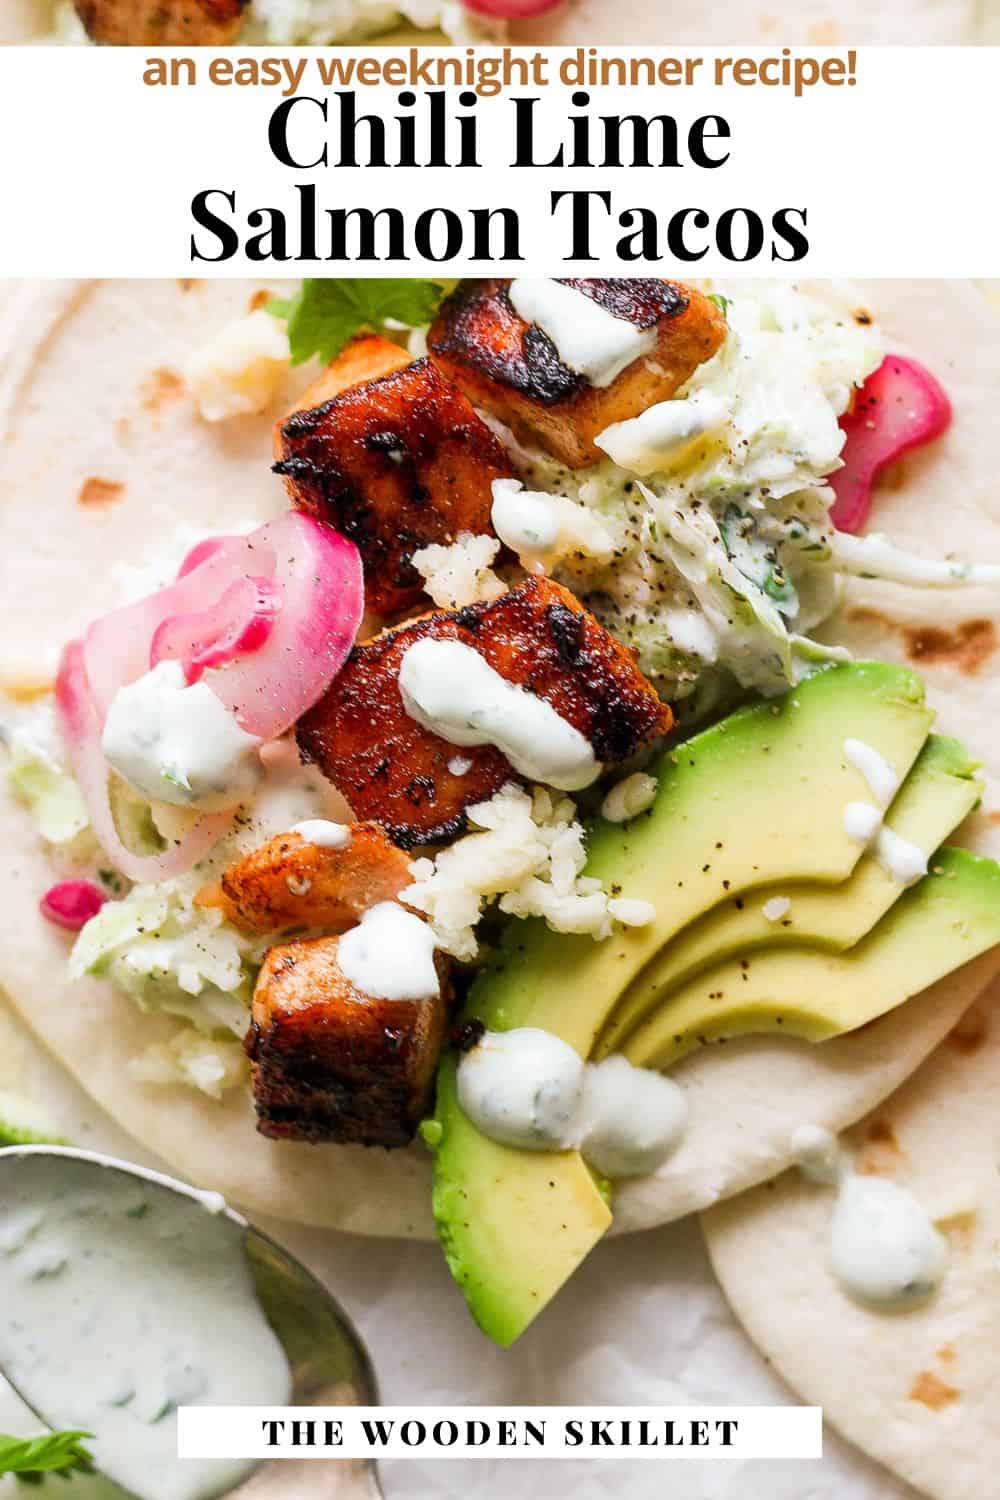 Pinterest image that shows a salmon taco with the title, "Chili lime salmon tacos. an easy weeknight dinner recipe